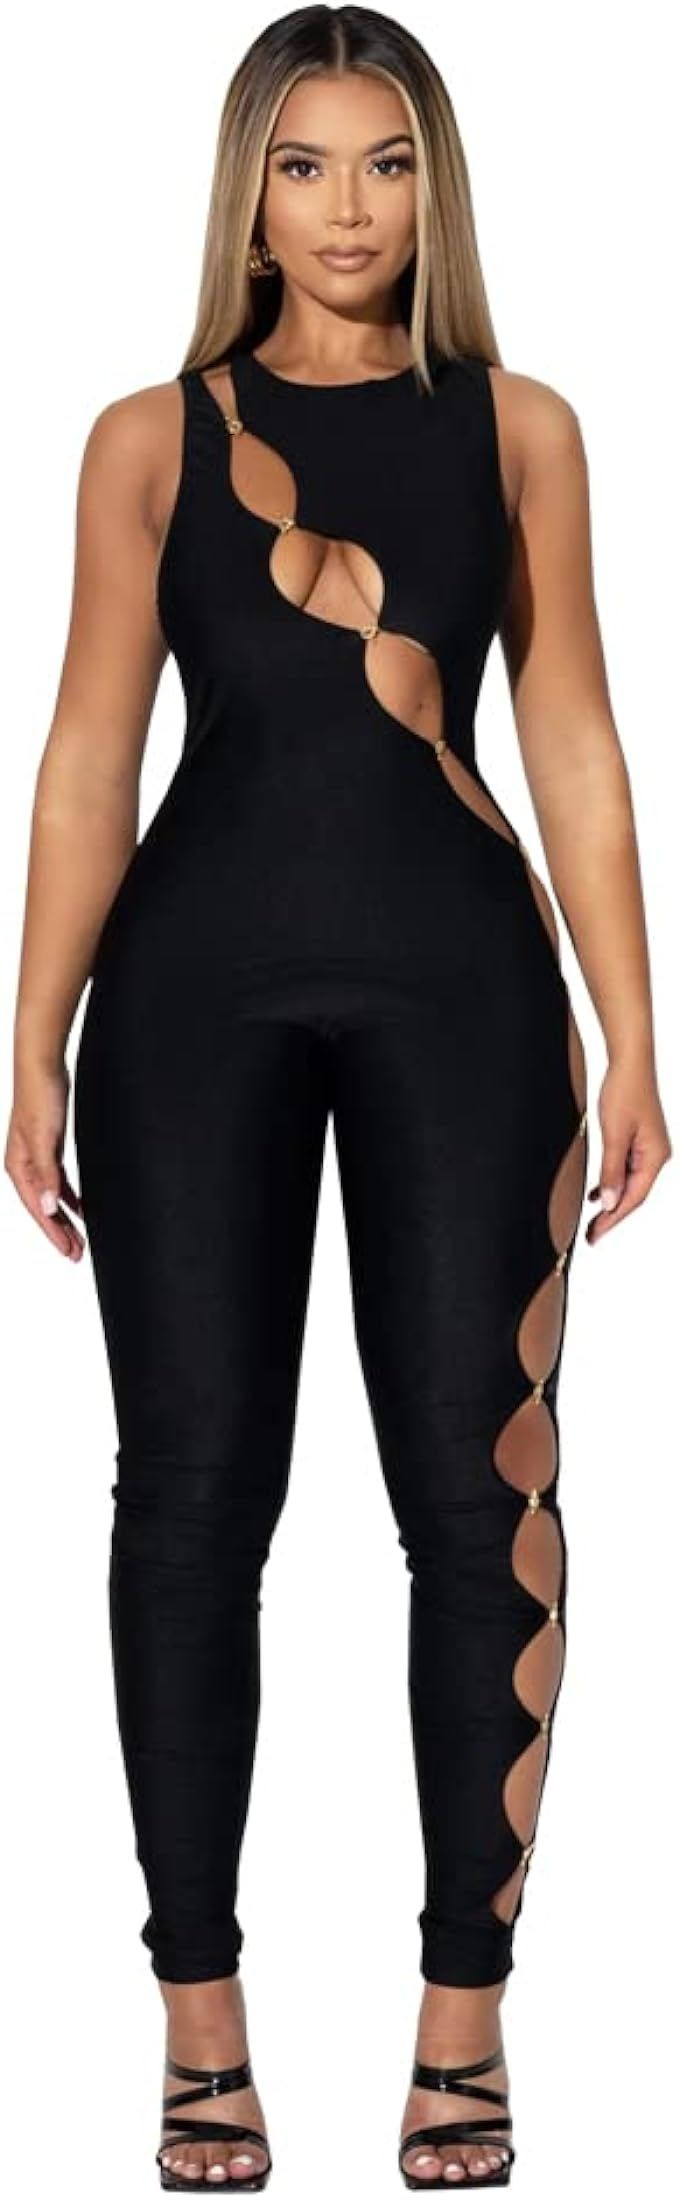 XLLAIS Womens Cut Out Jumpsuit Sexy Tight Bodycon Romper Club Overall Casual One Piece Outfit | Amazon (US)